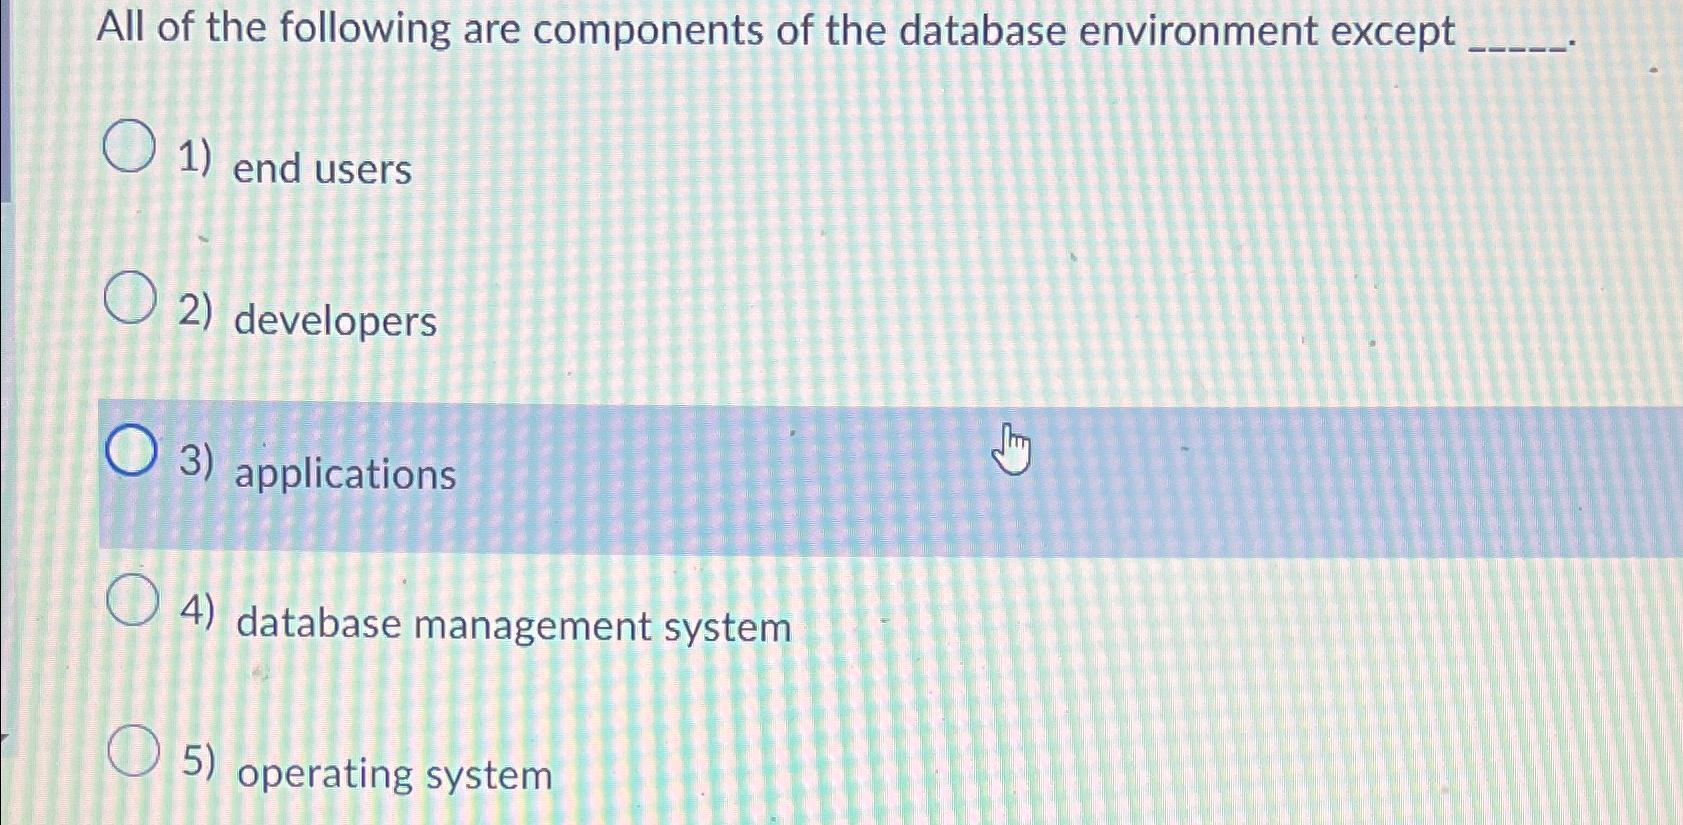 All of the following are components of the database environment except 1) end users O2) developers 3)